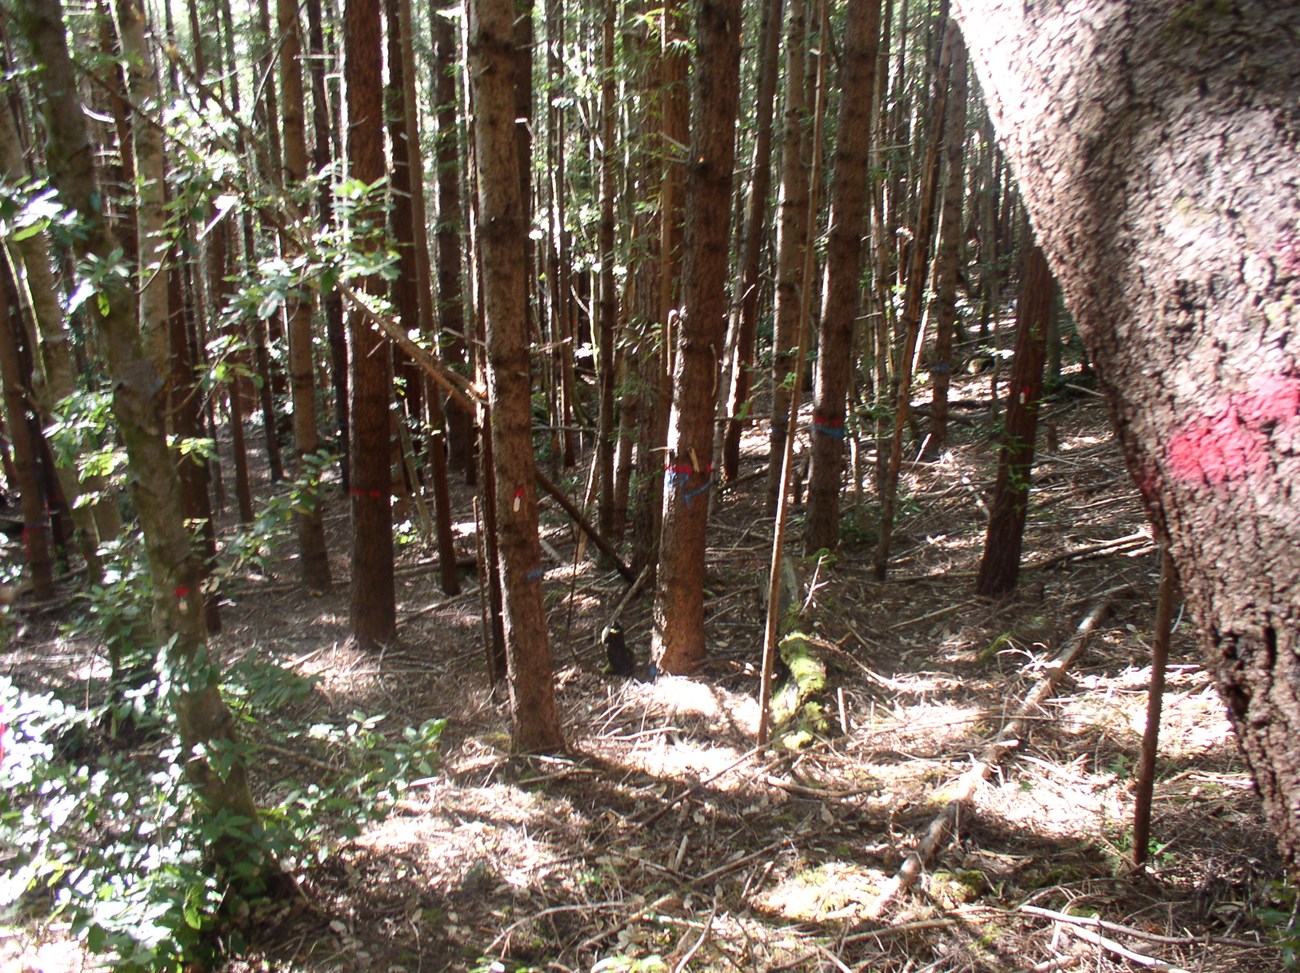 Dense thicket of trees, many with red spraypaint markings. There is virtually no undergrowth.